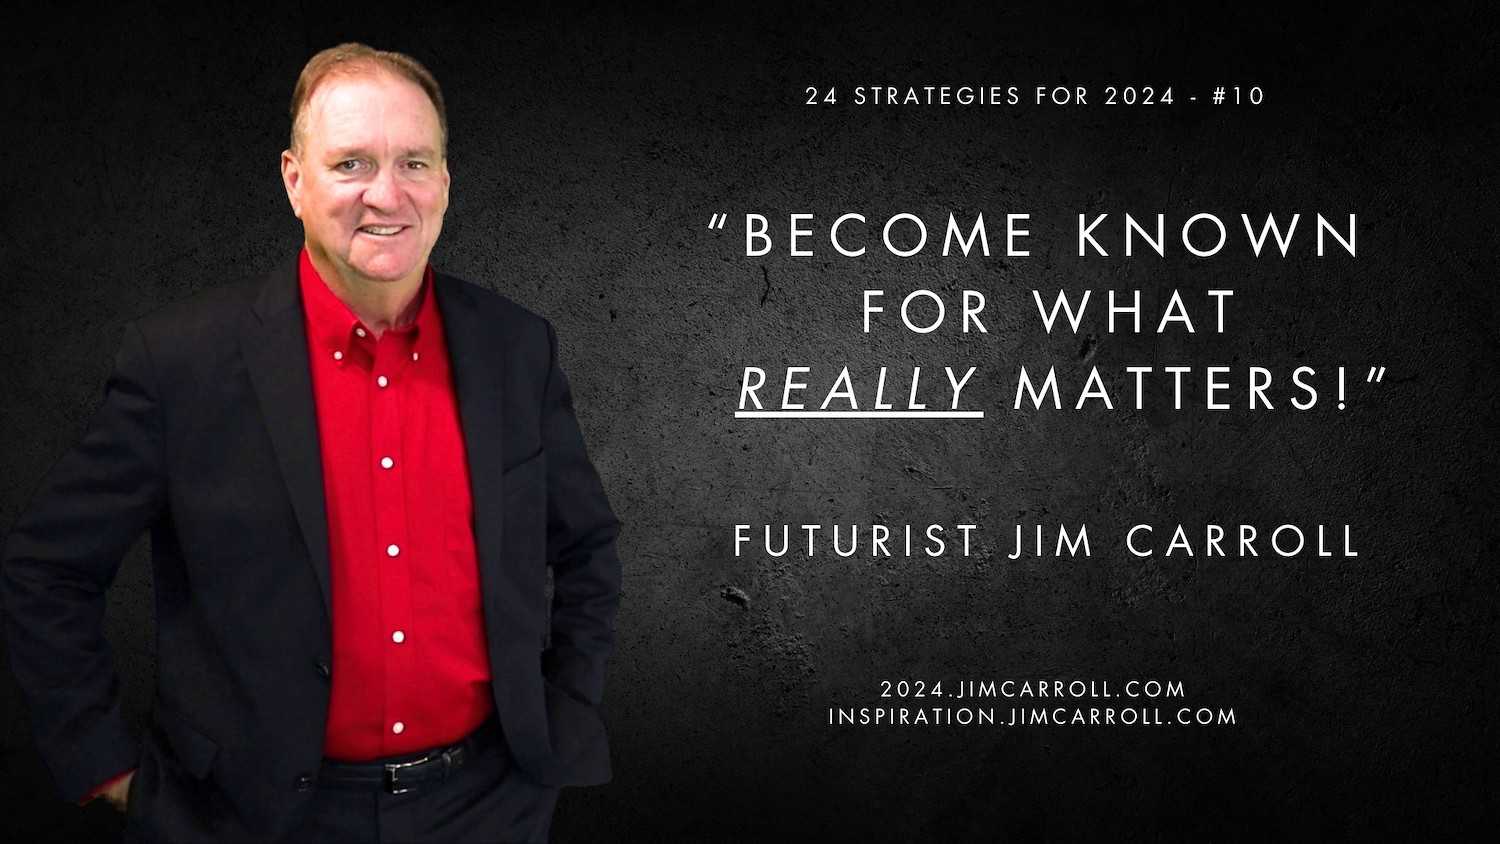 "Become known for what really matters!" - Futurist Jim Carroll